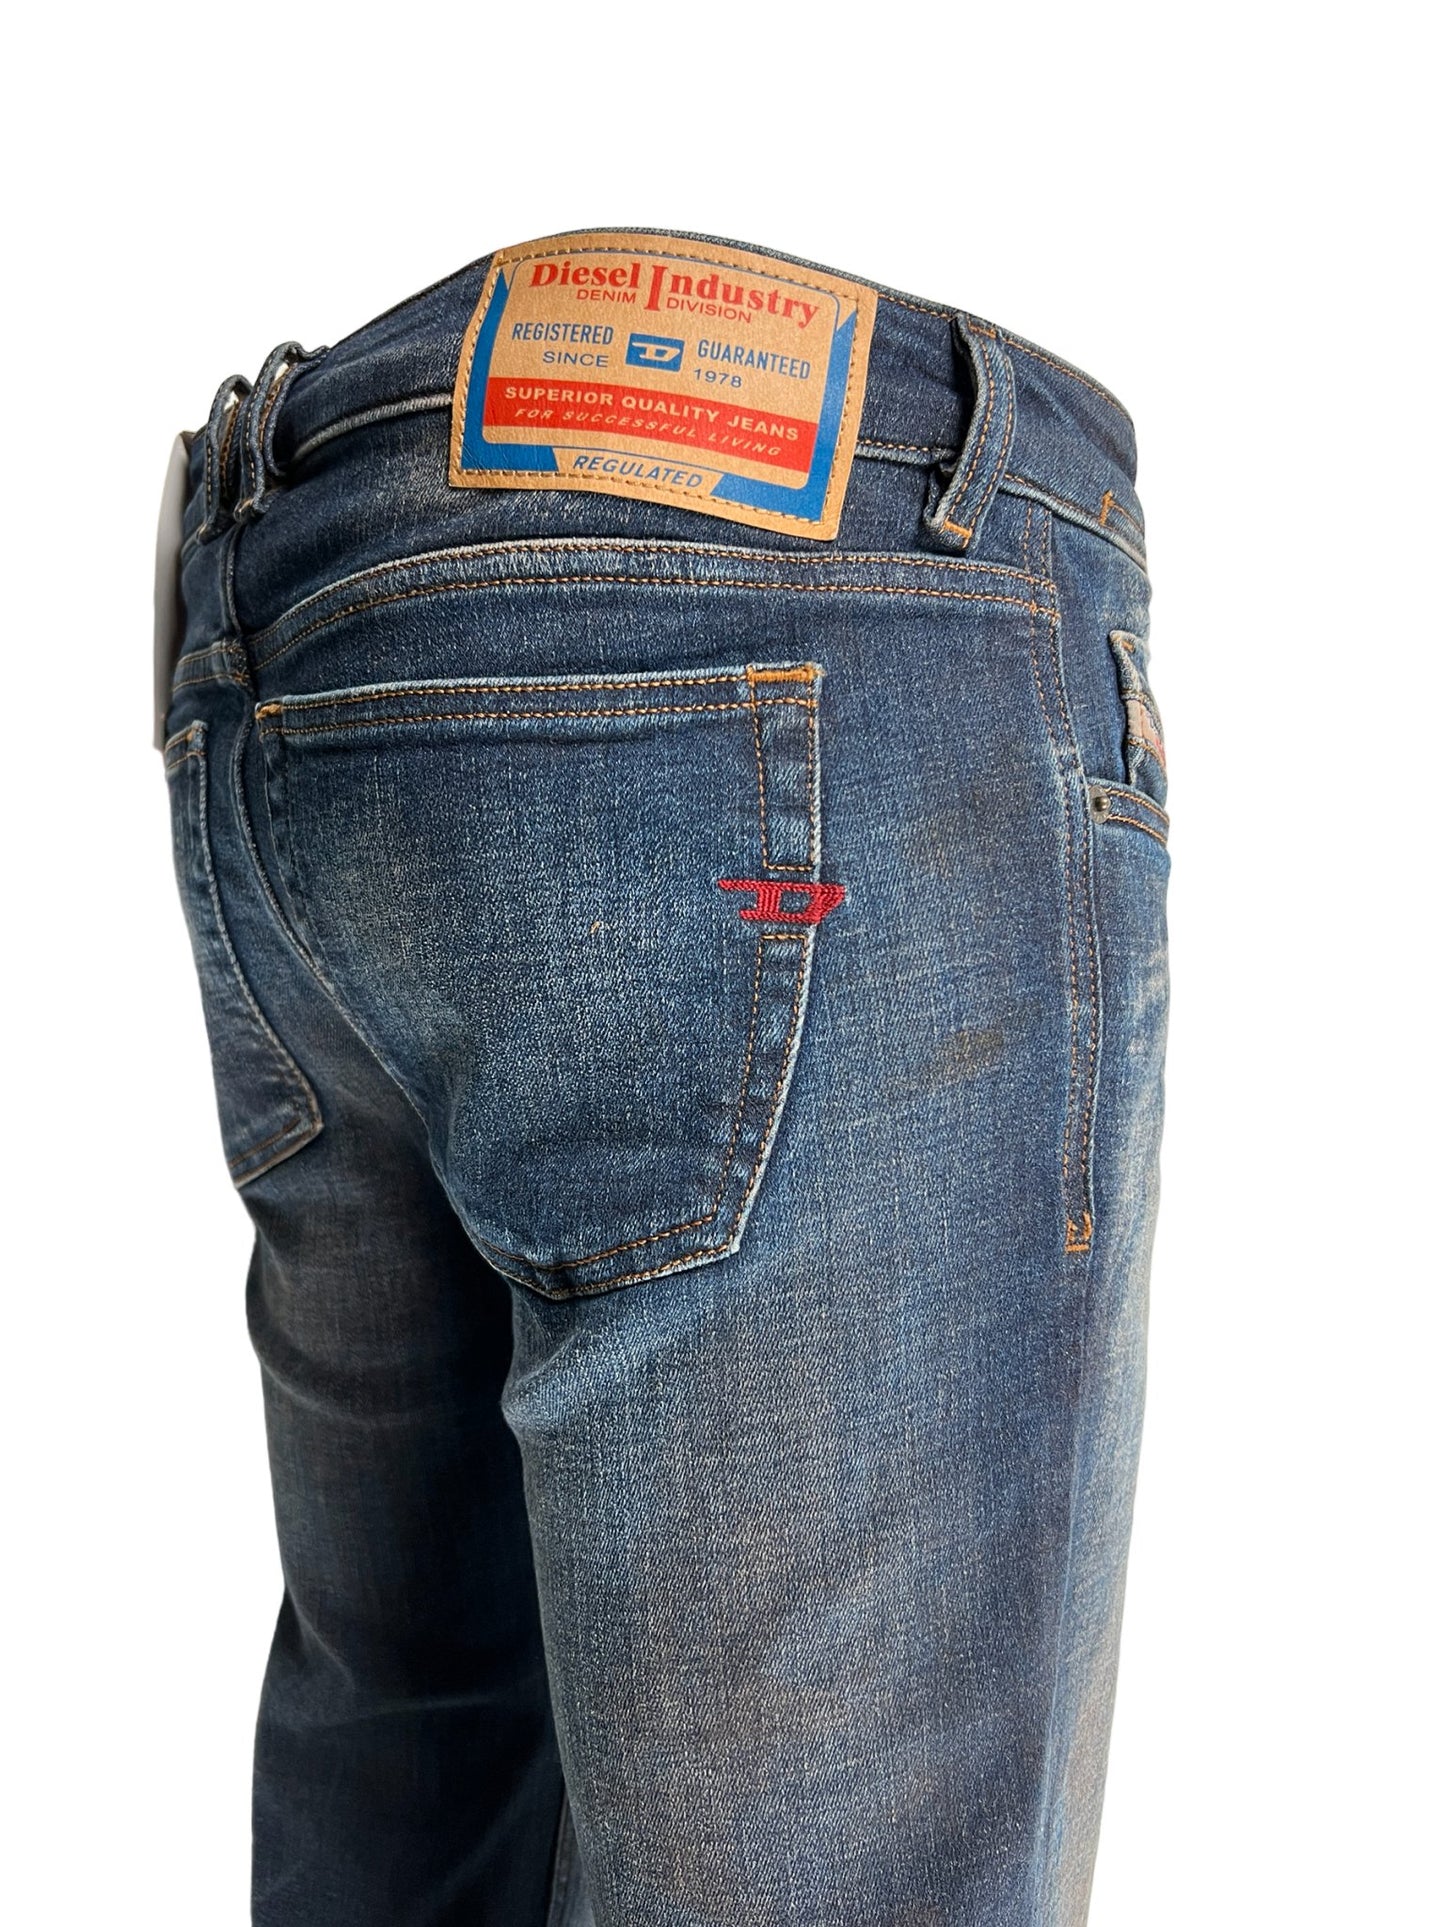 The back of a man's Diesel jeans with a label on it, made from organic cotton.